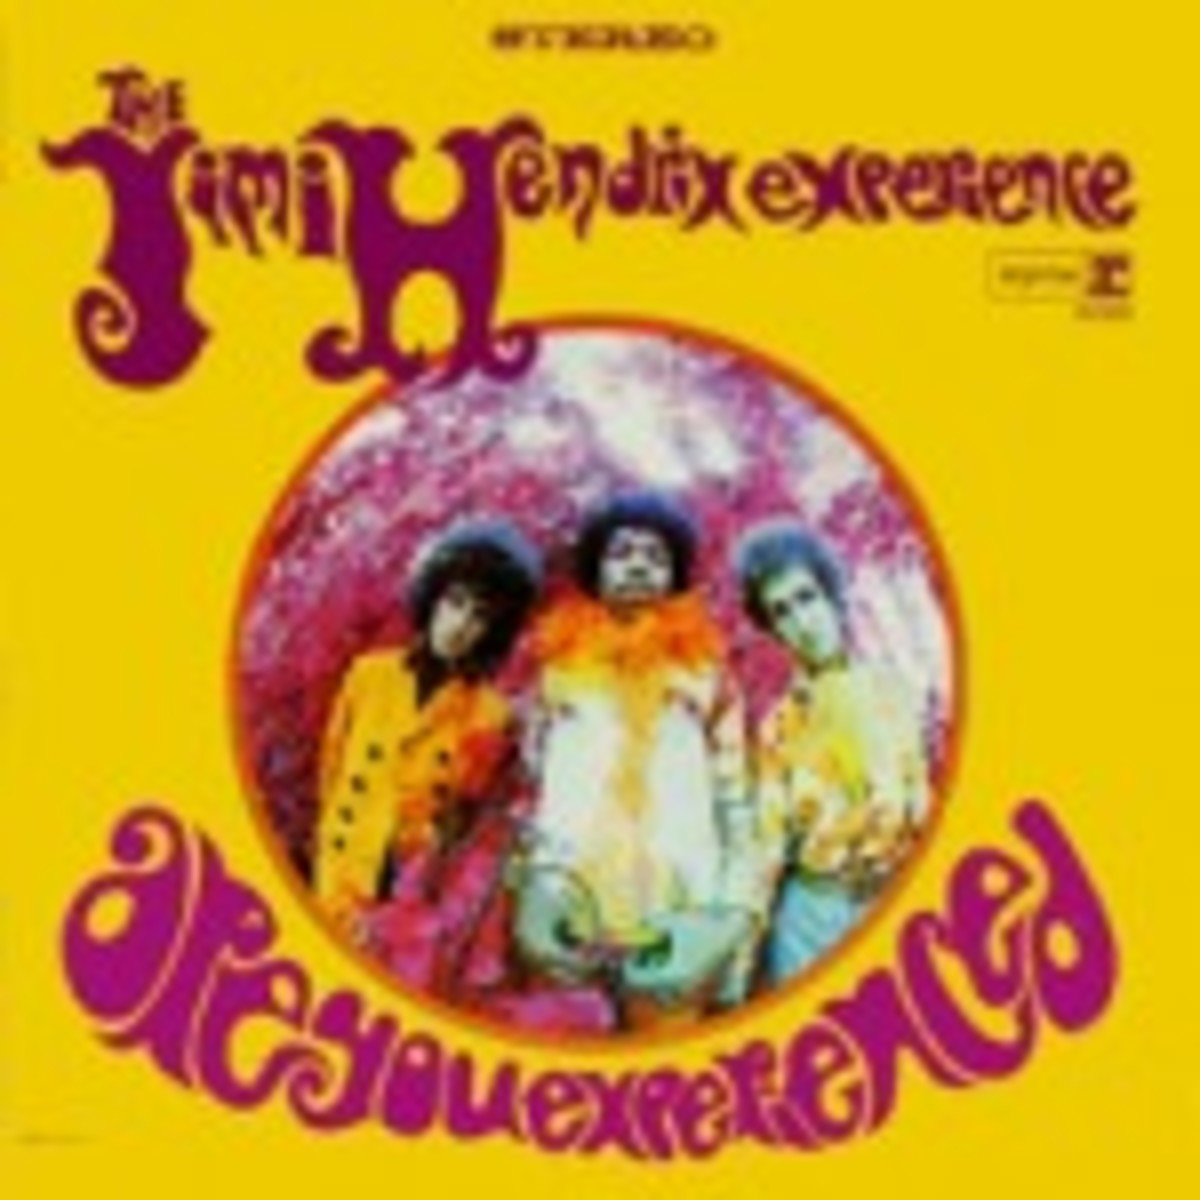 Jimi Hendrix Experience Are You Experienced